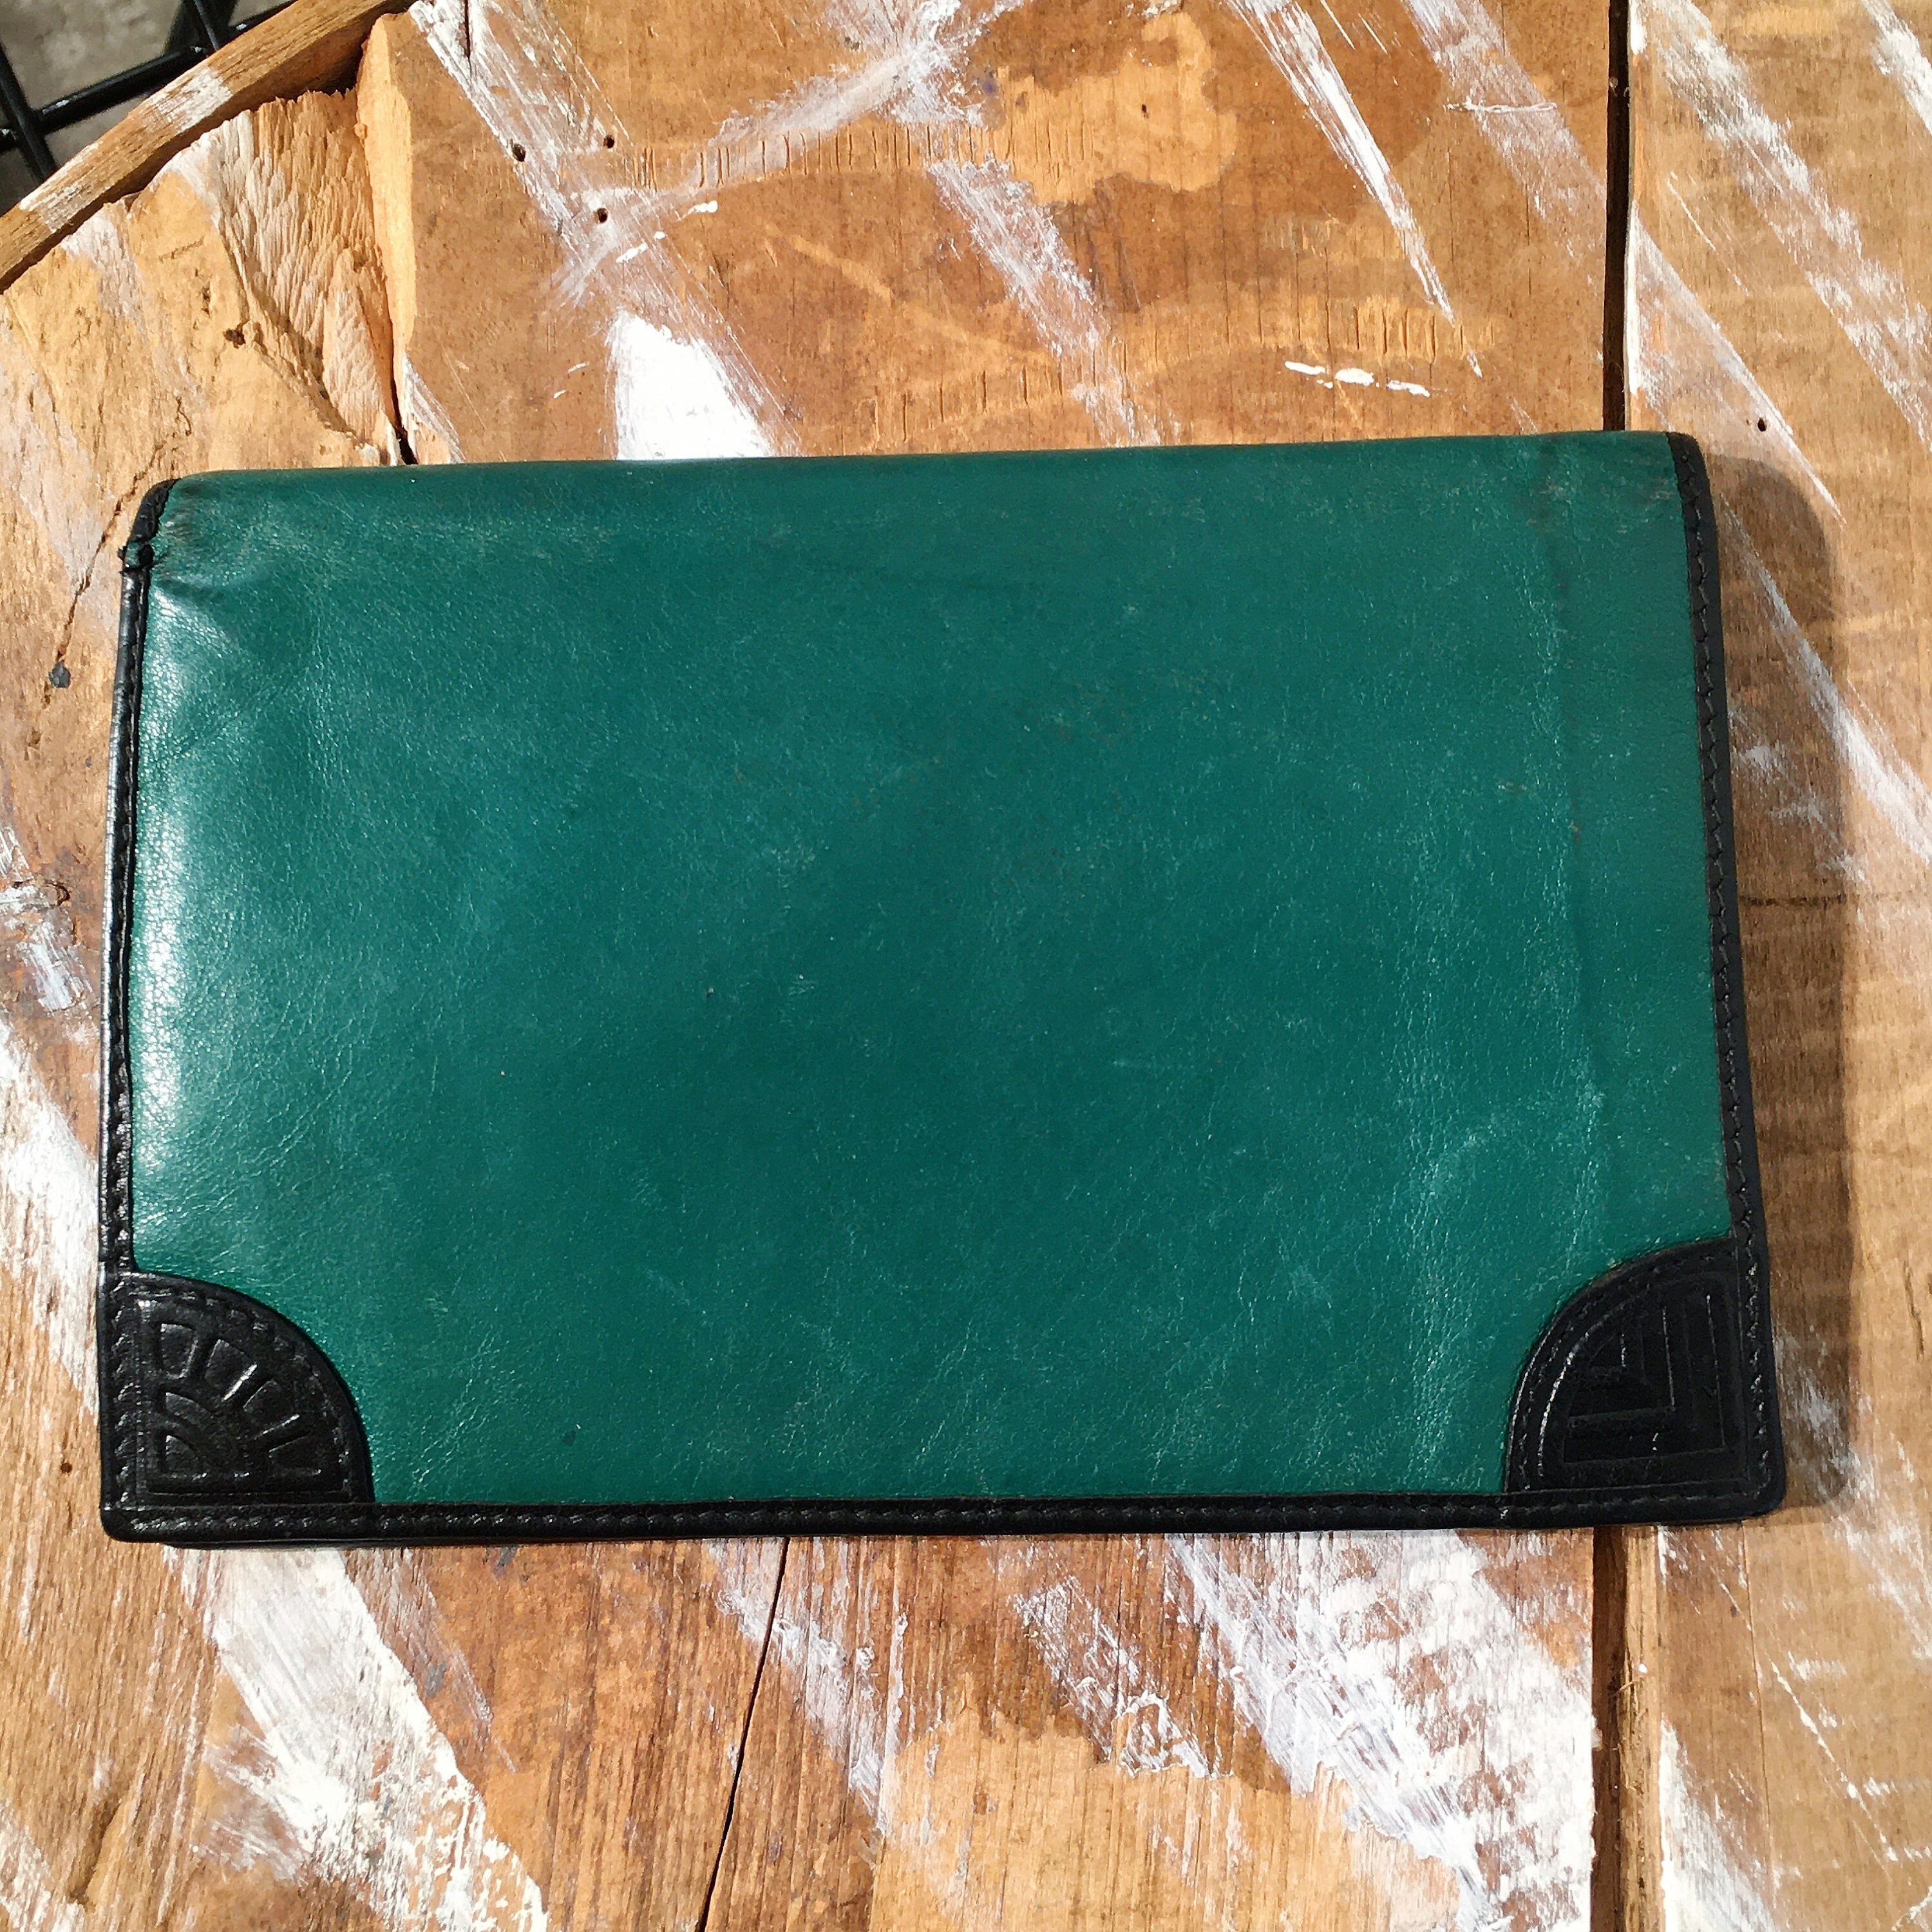 Vintage Louis Feraud Paris Leather Wallet Made in Italy. 